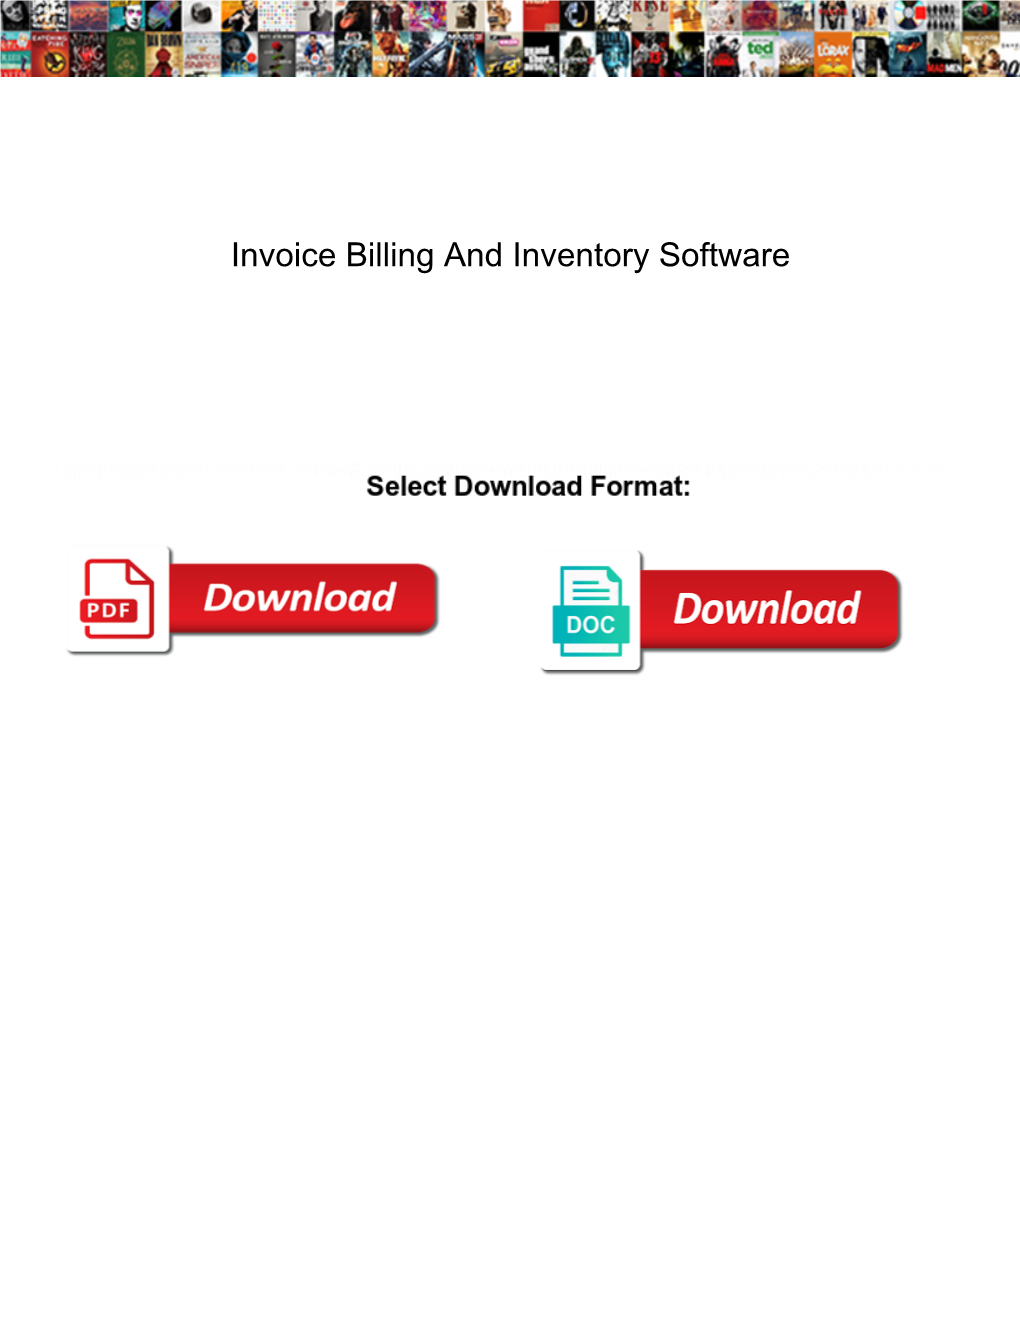 Invoice Billing and Inventory Software